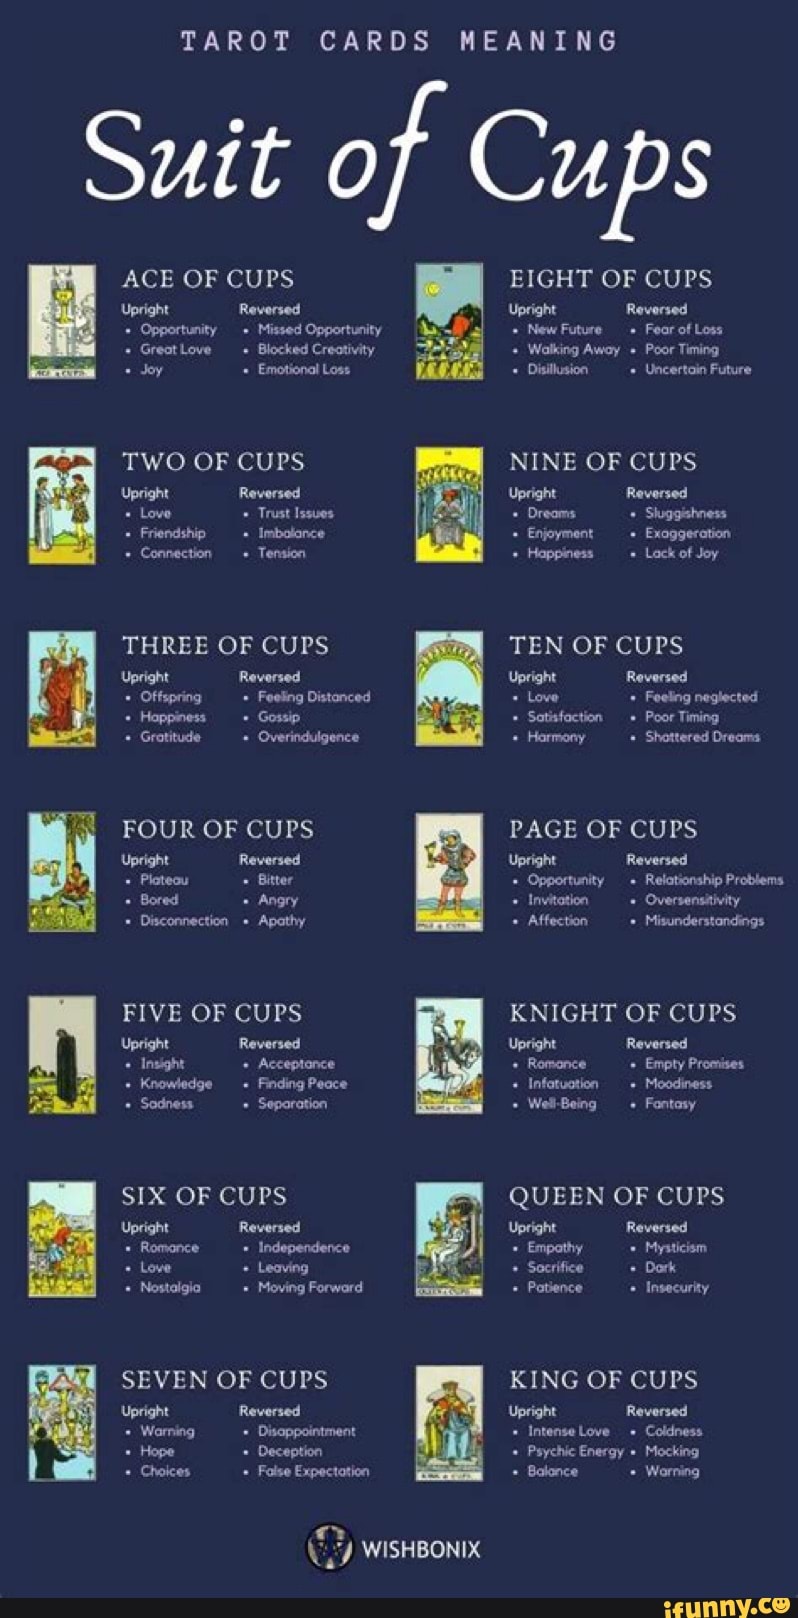 5 of cups in love